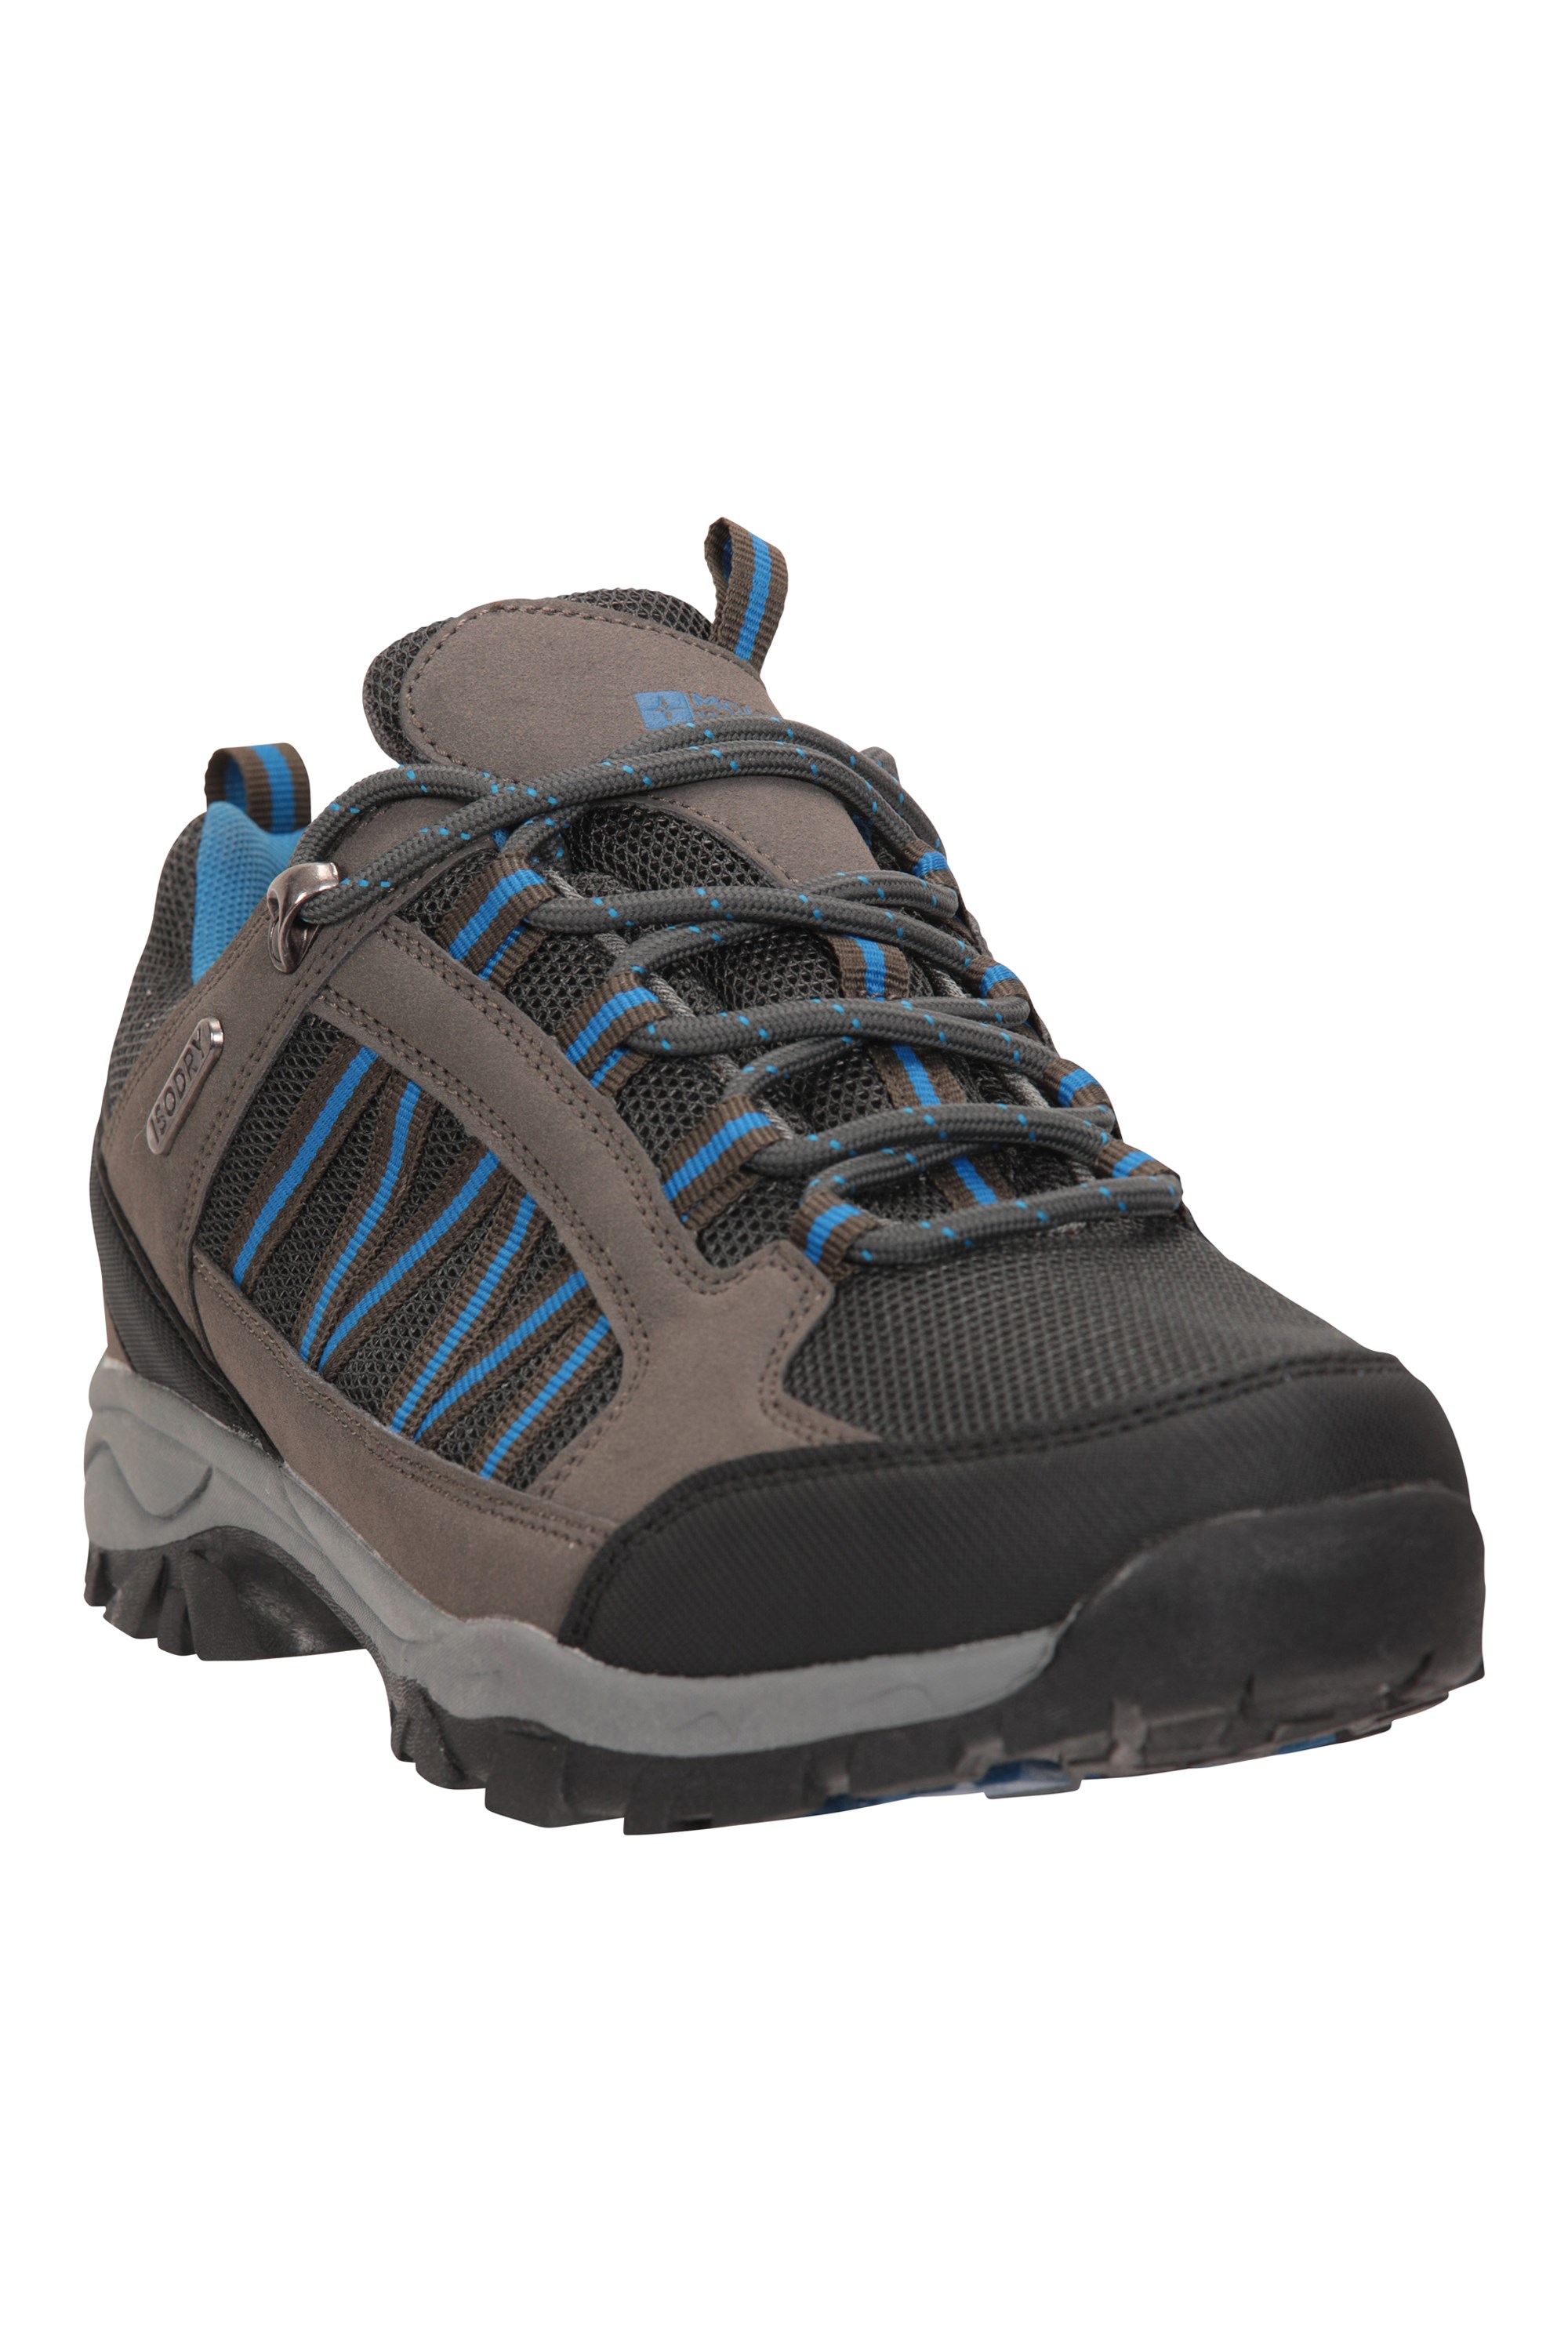 Mountain Warehouse Path Mens Waterproof Outdoor Walking Shoes Black 7 M US  Men : : Clothing, Shoes & Accessories